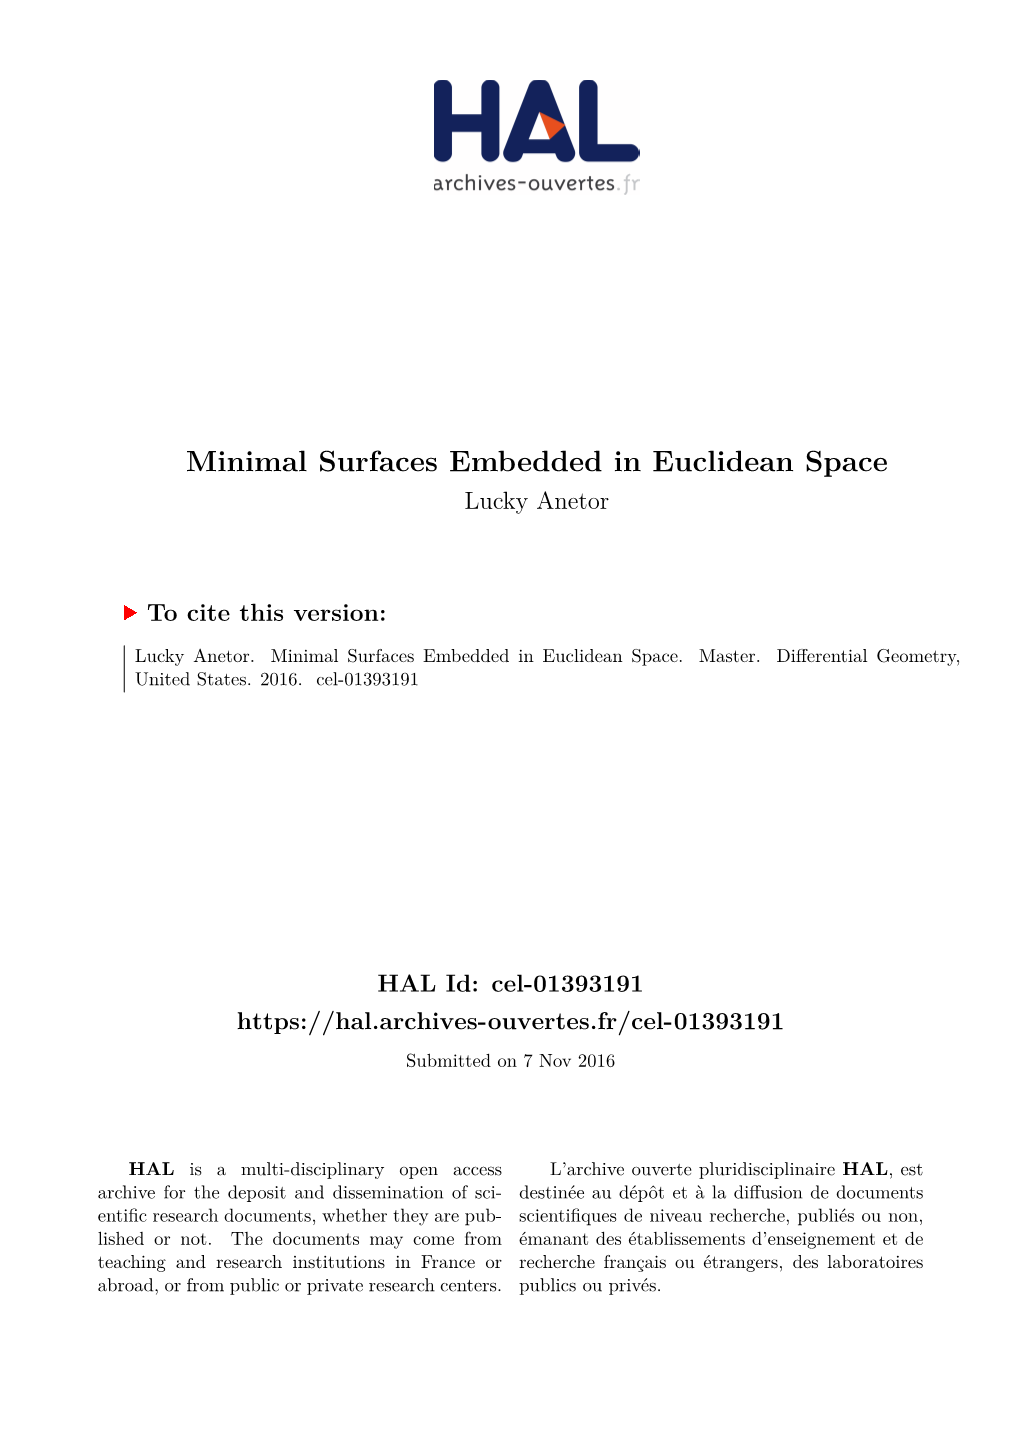 Minimal Surfaces Embedded in Euclidean Space Lucky Anetor